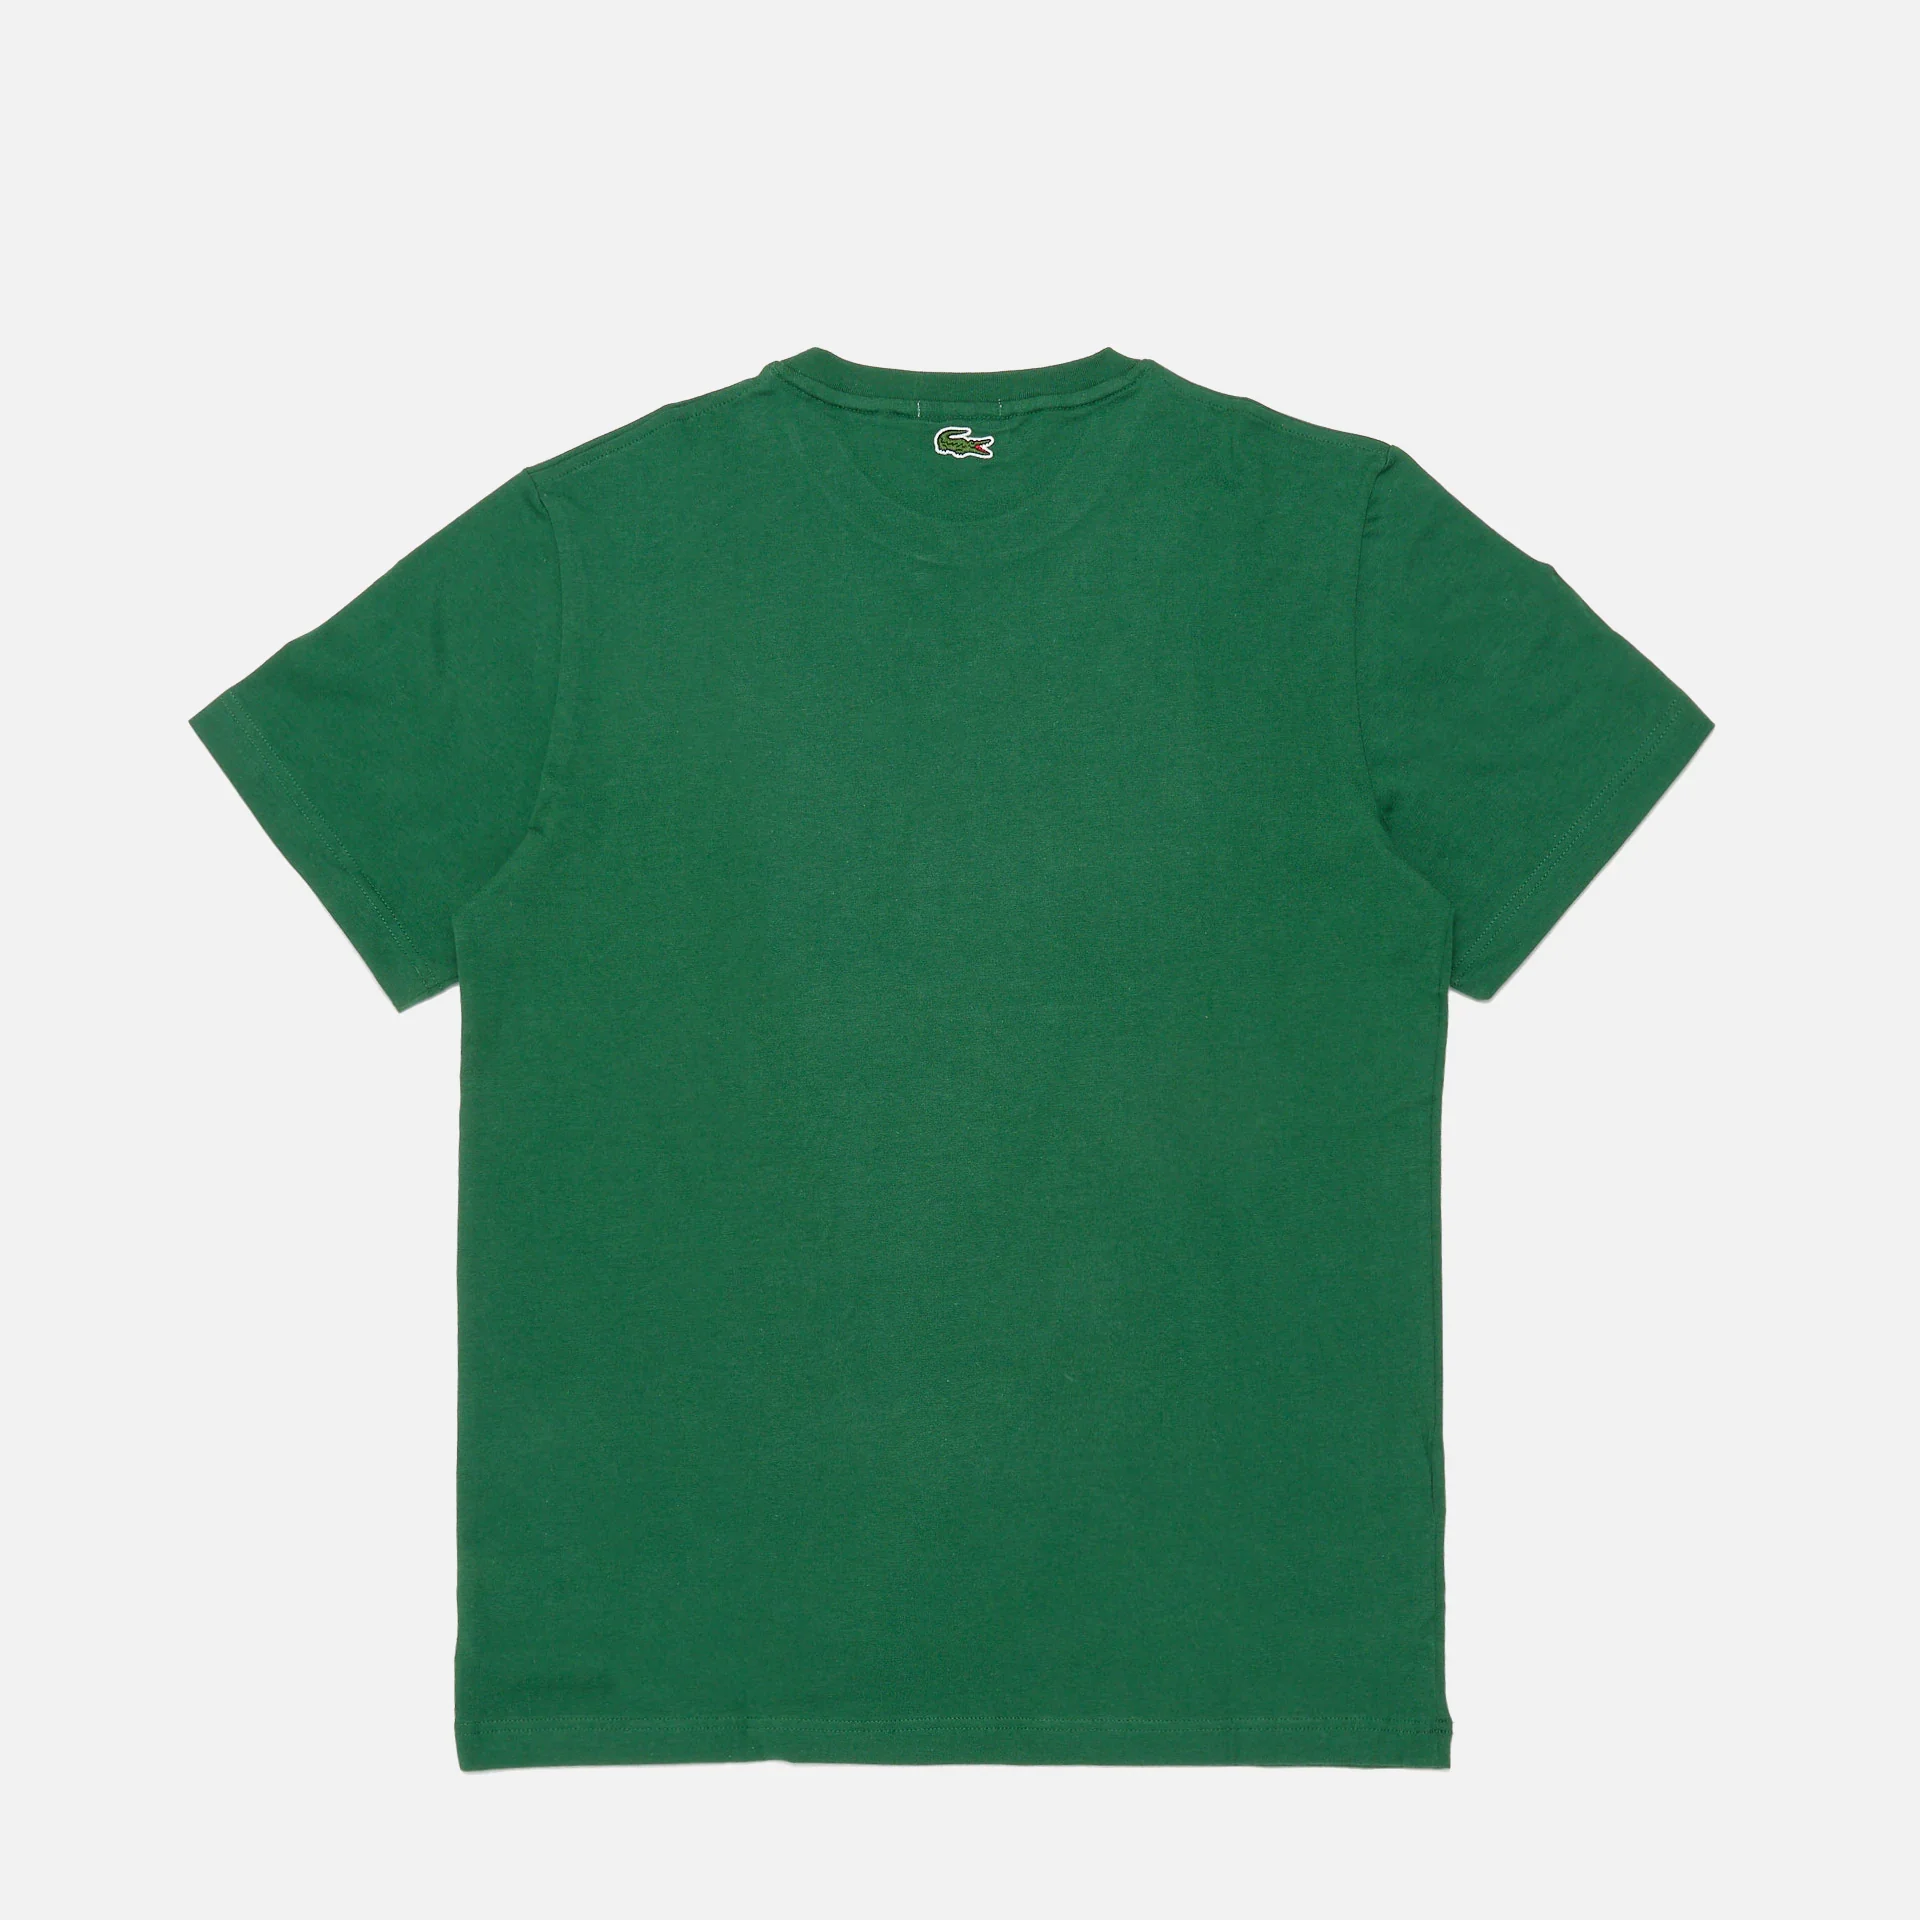 Lacoste Cotton Jersey Branded T-Shirt Green